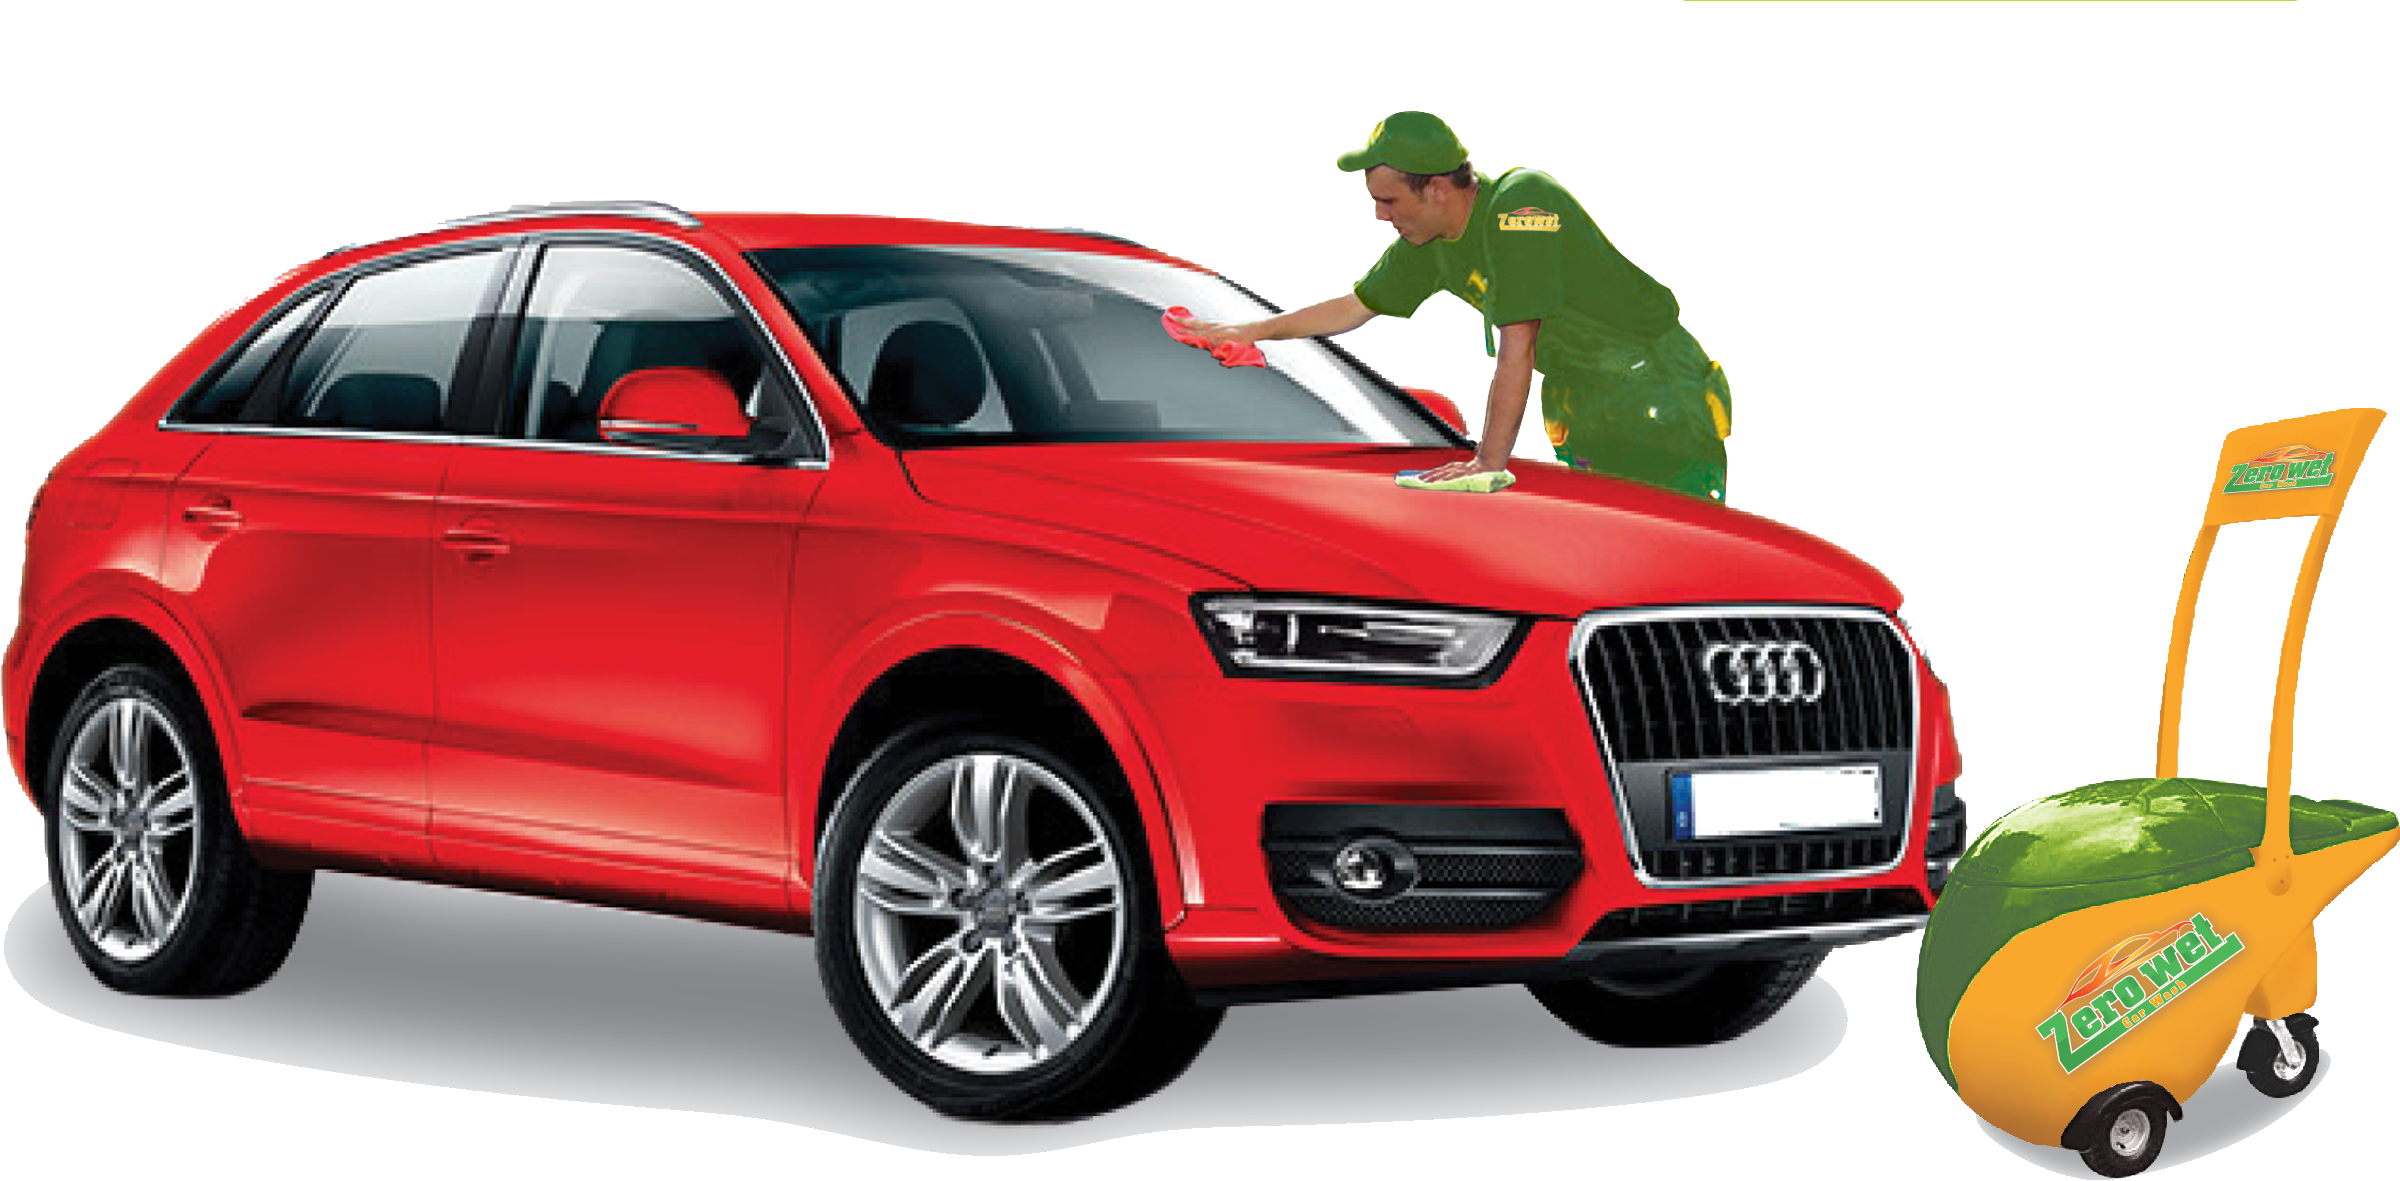 A Man In Green Uniform Cleaning A Red Car